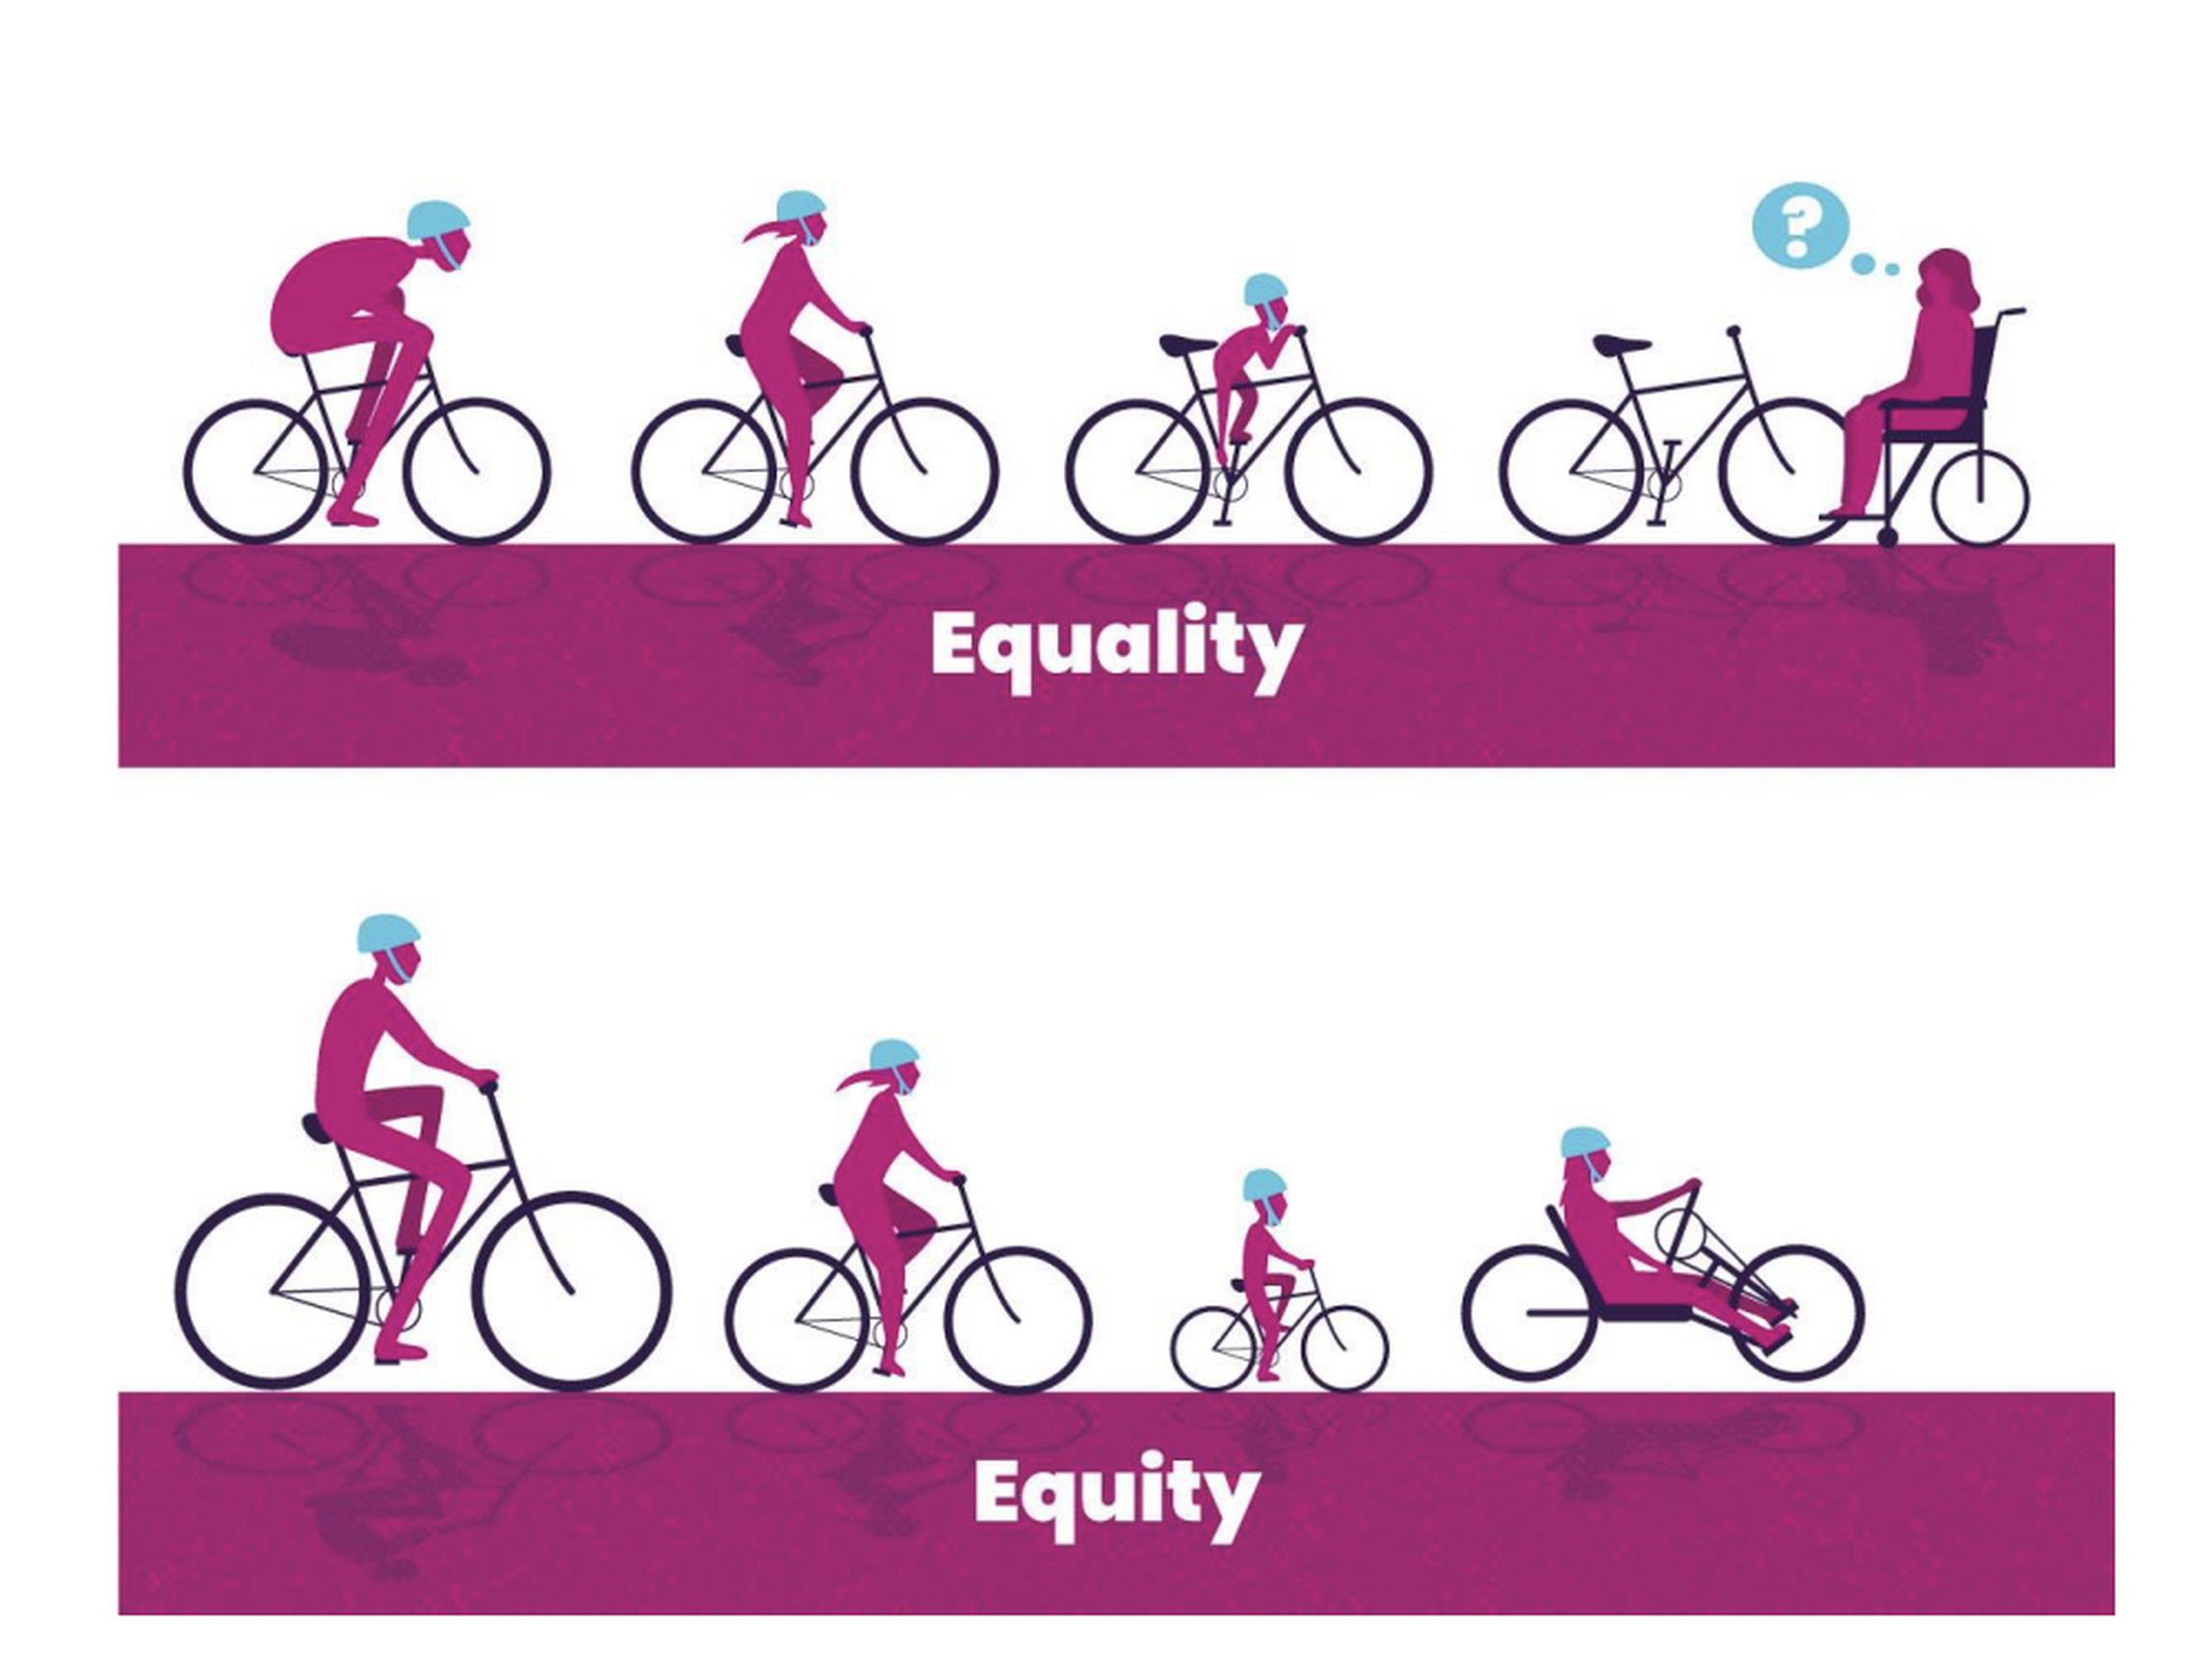 A visual representation of the difference between equality and equity. In the equality situation, four people with varying height or disability requirements are attempting to use the same bicycle. In the equity situation, the same four people use four bikes adapted to those requirements (from the report)